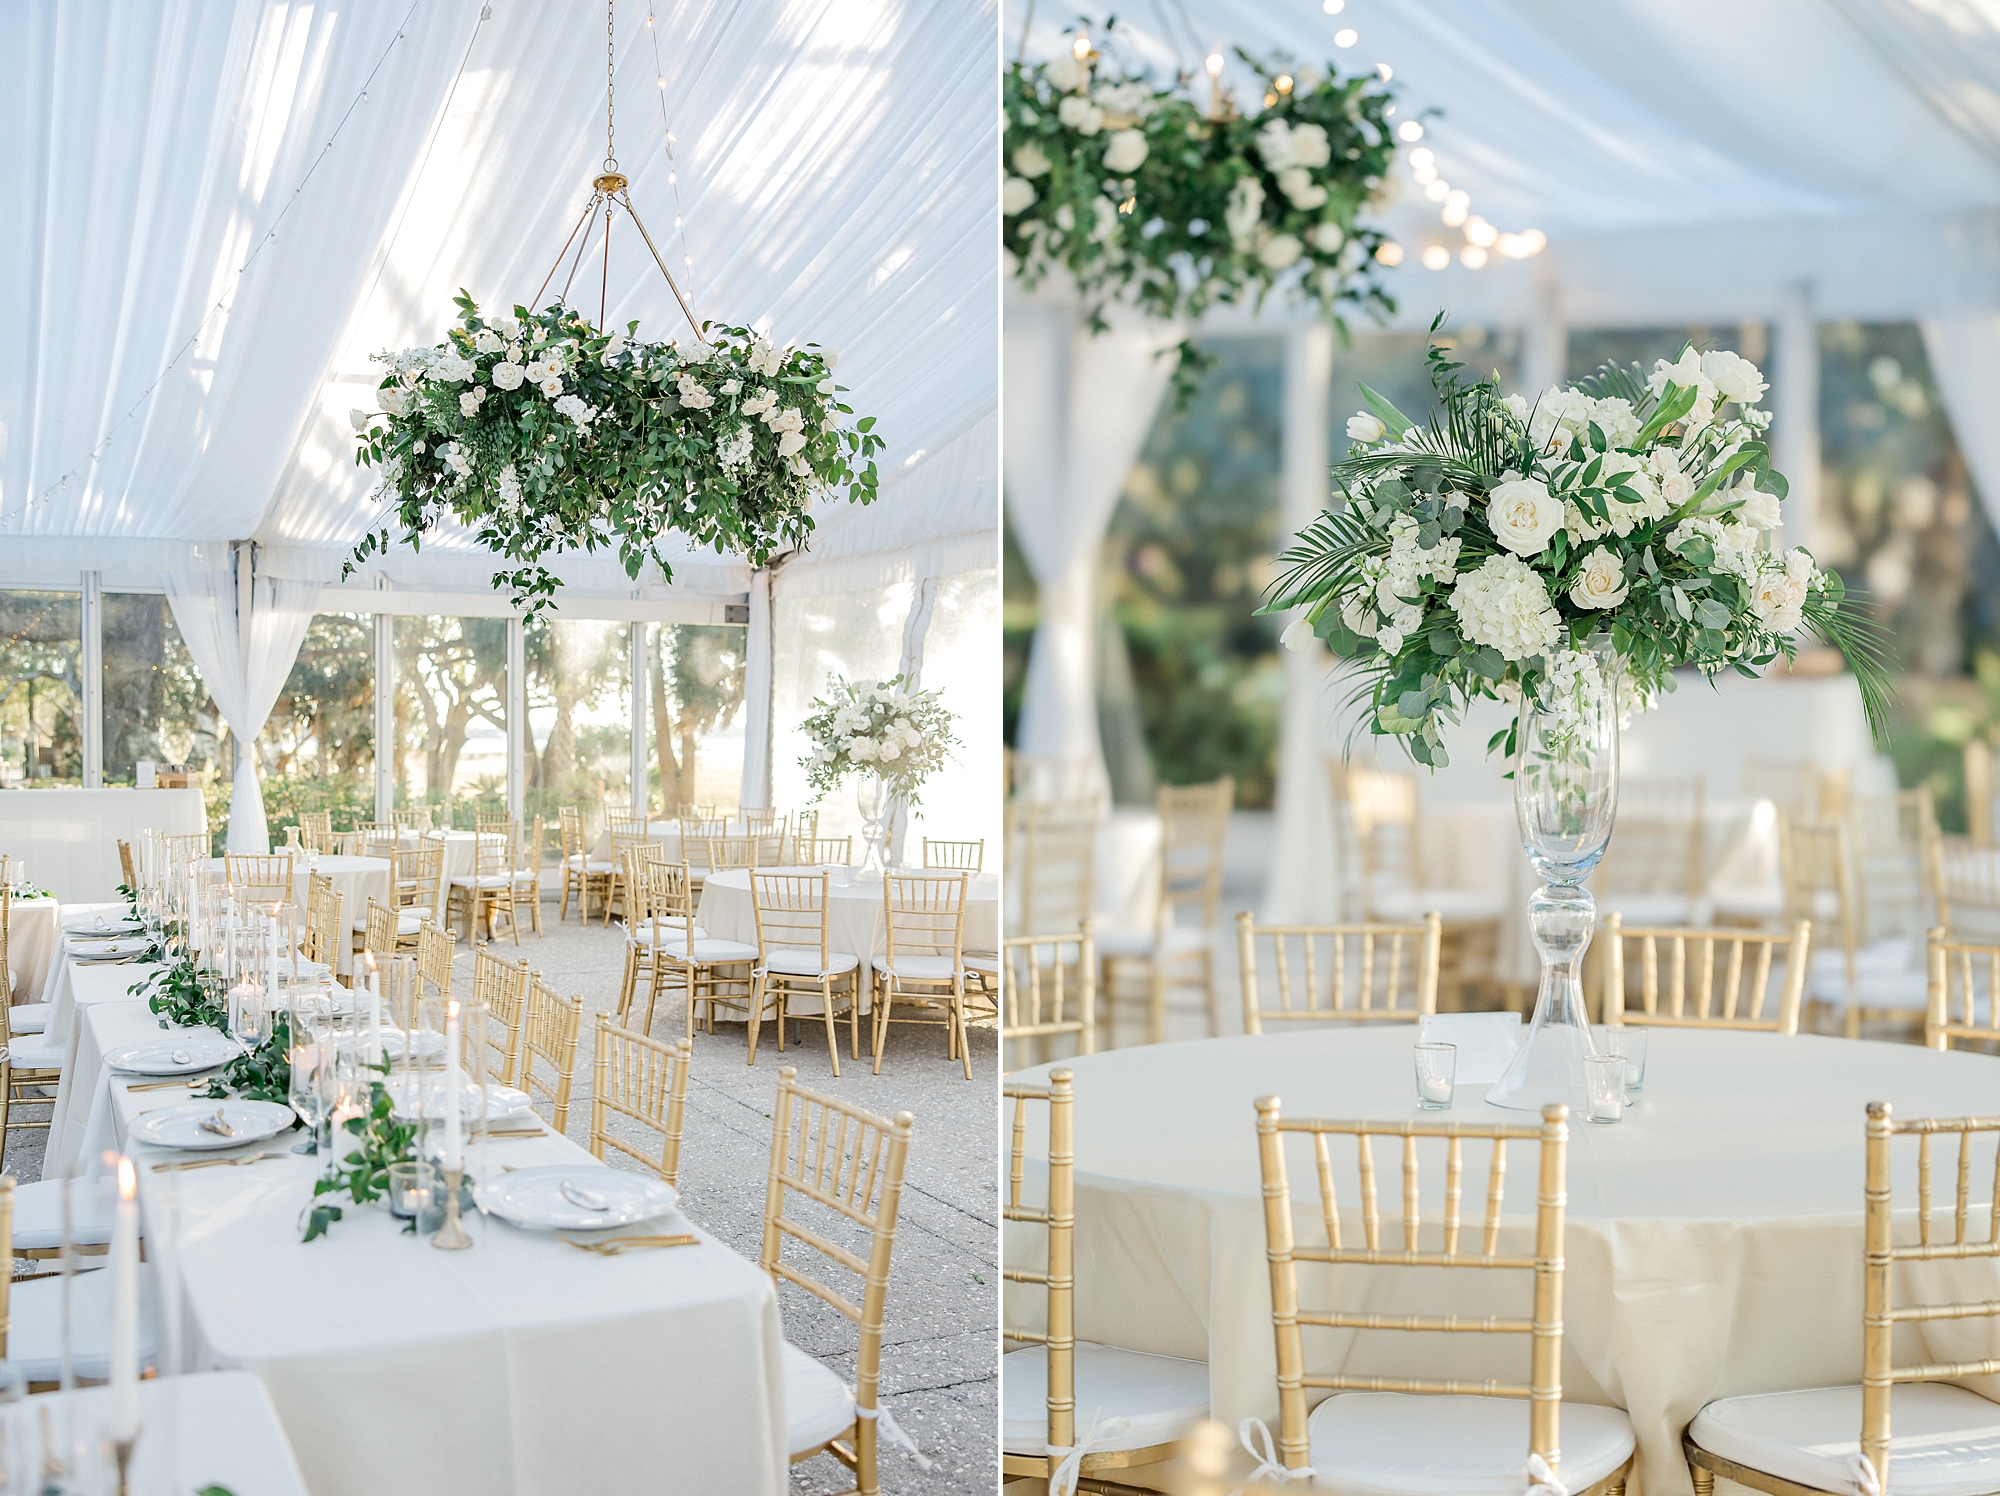 flower arrangements hang from ceiling at Lowndes Grove Wedding reception